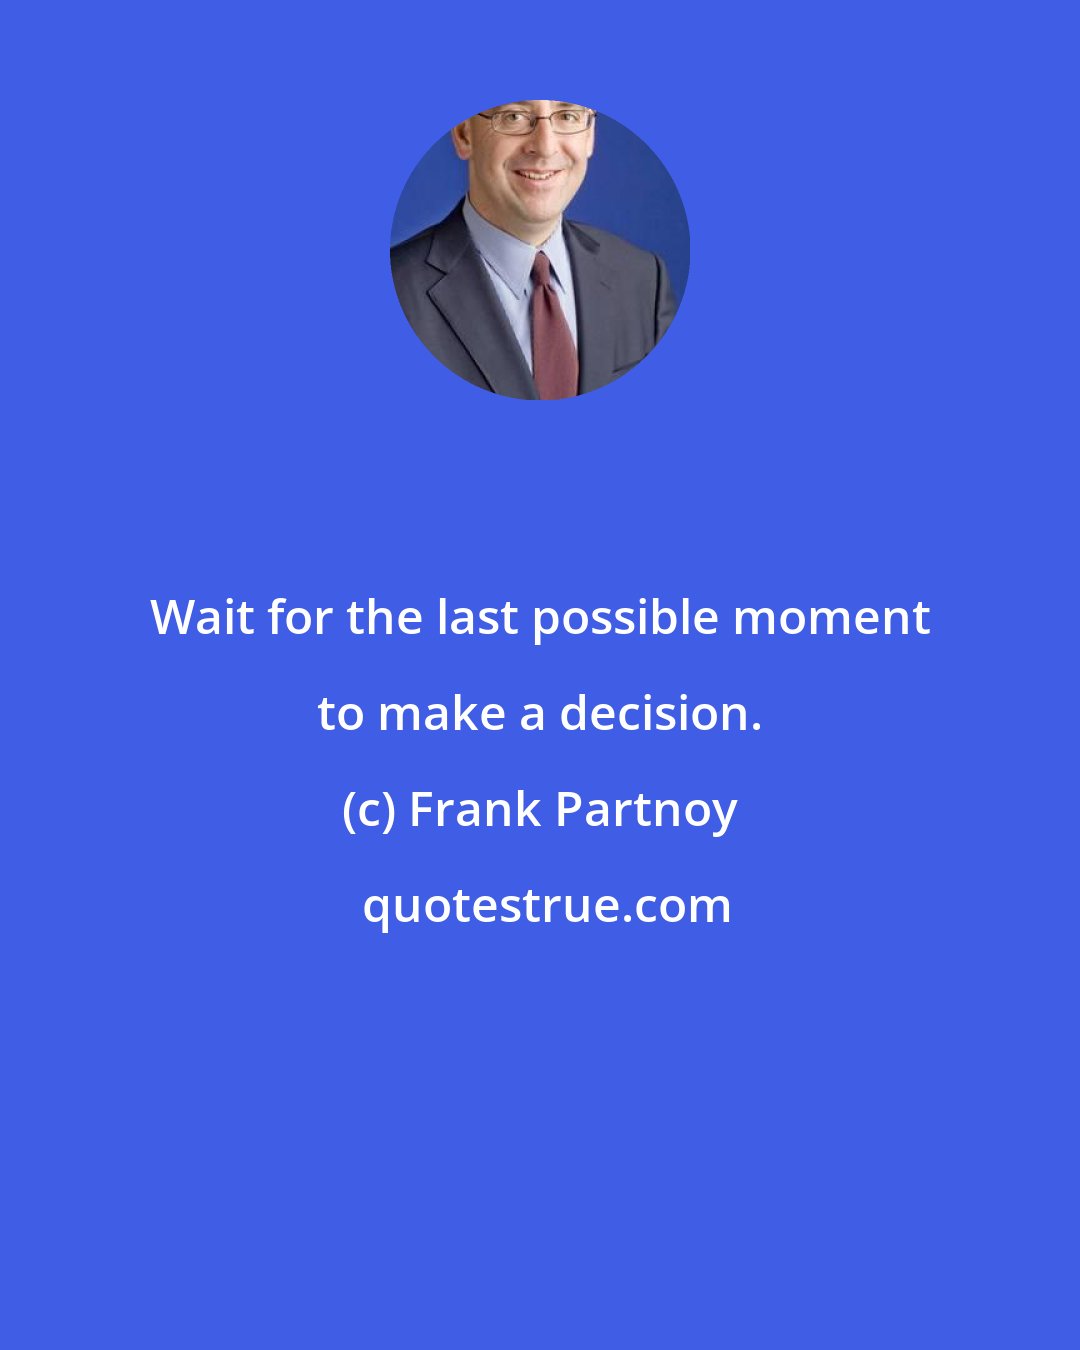 Frank Partnoy: Wait for the last possible moment to make a decision.